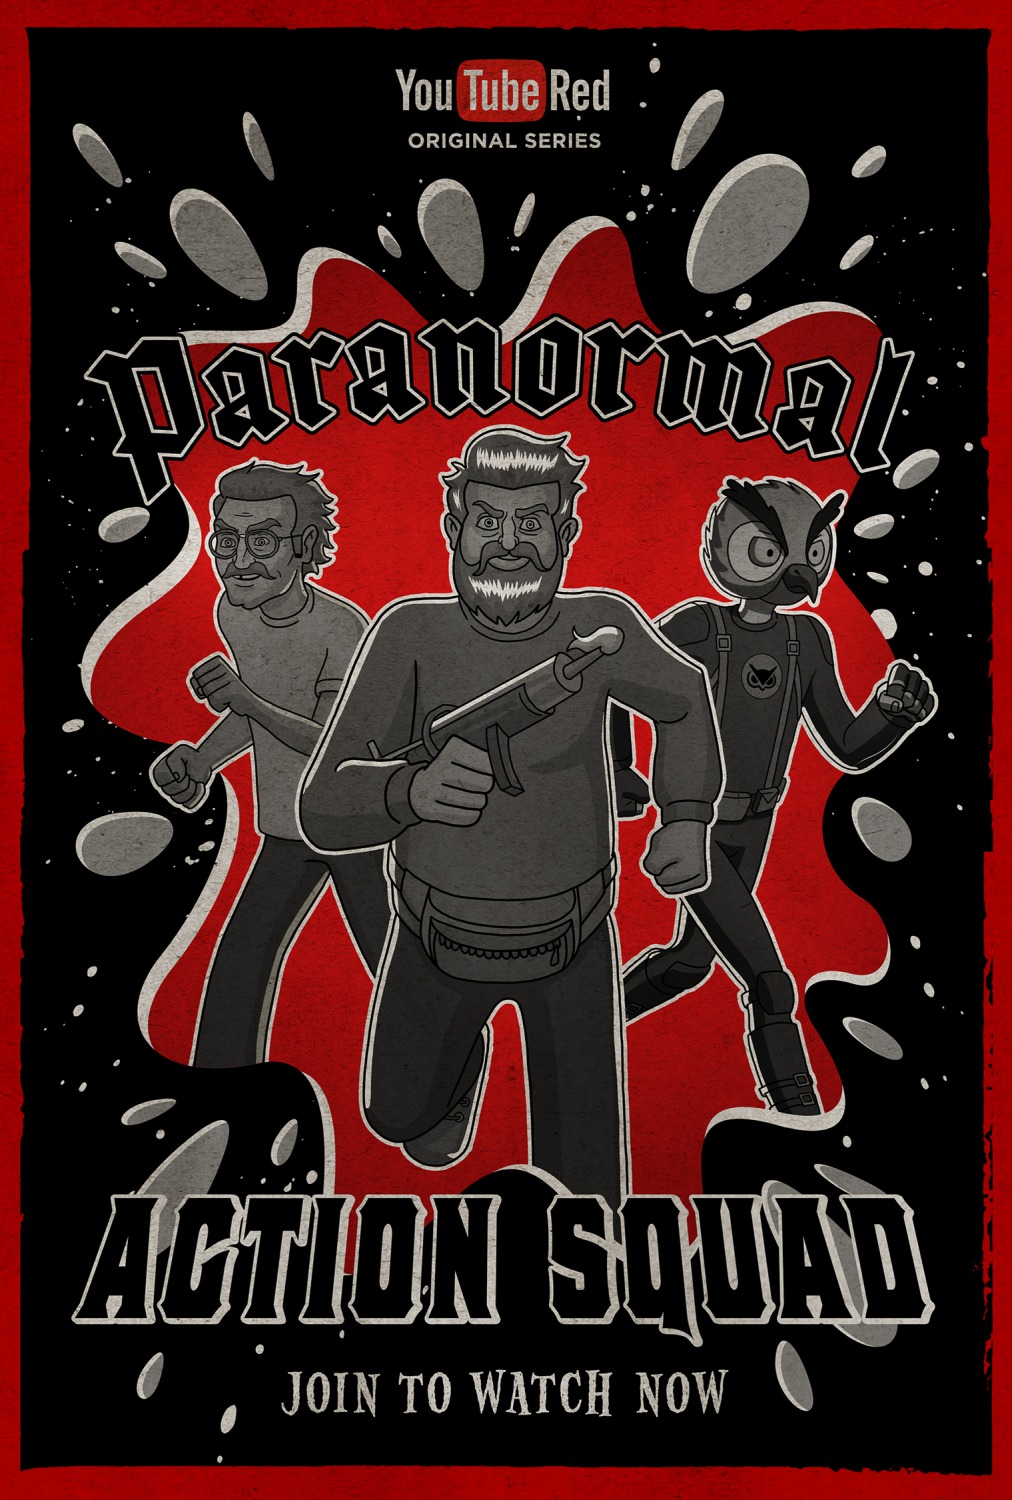 Extra Large TV Poster Image for Paranormal Action Squad (#11 of 11)